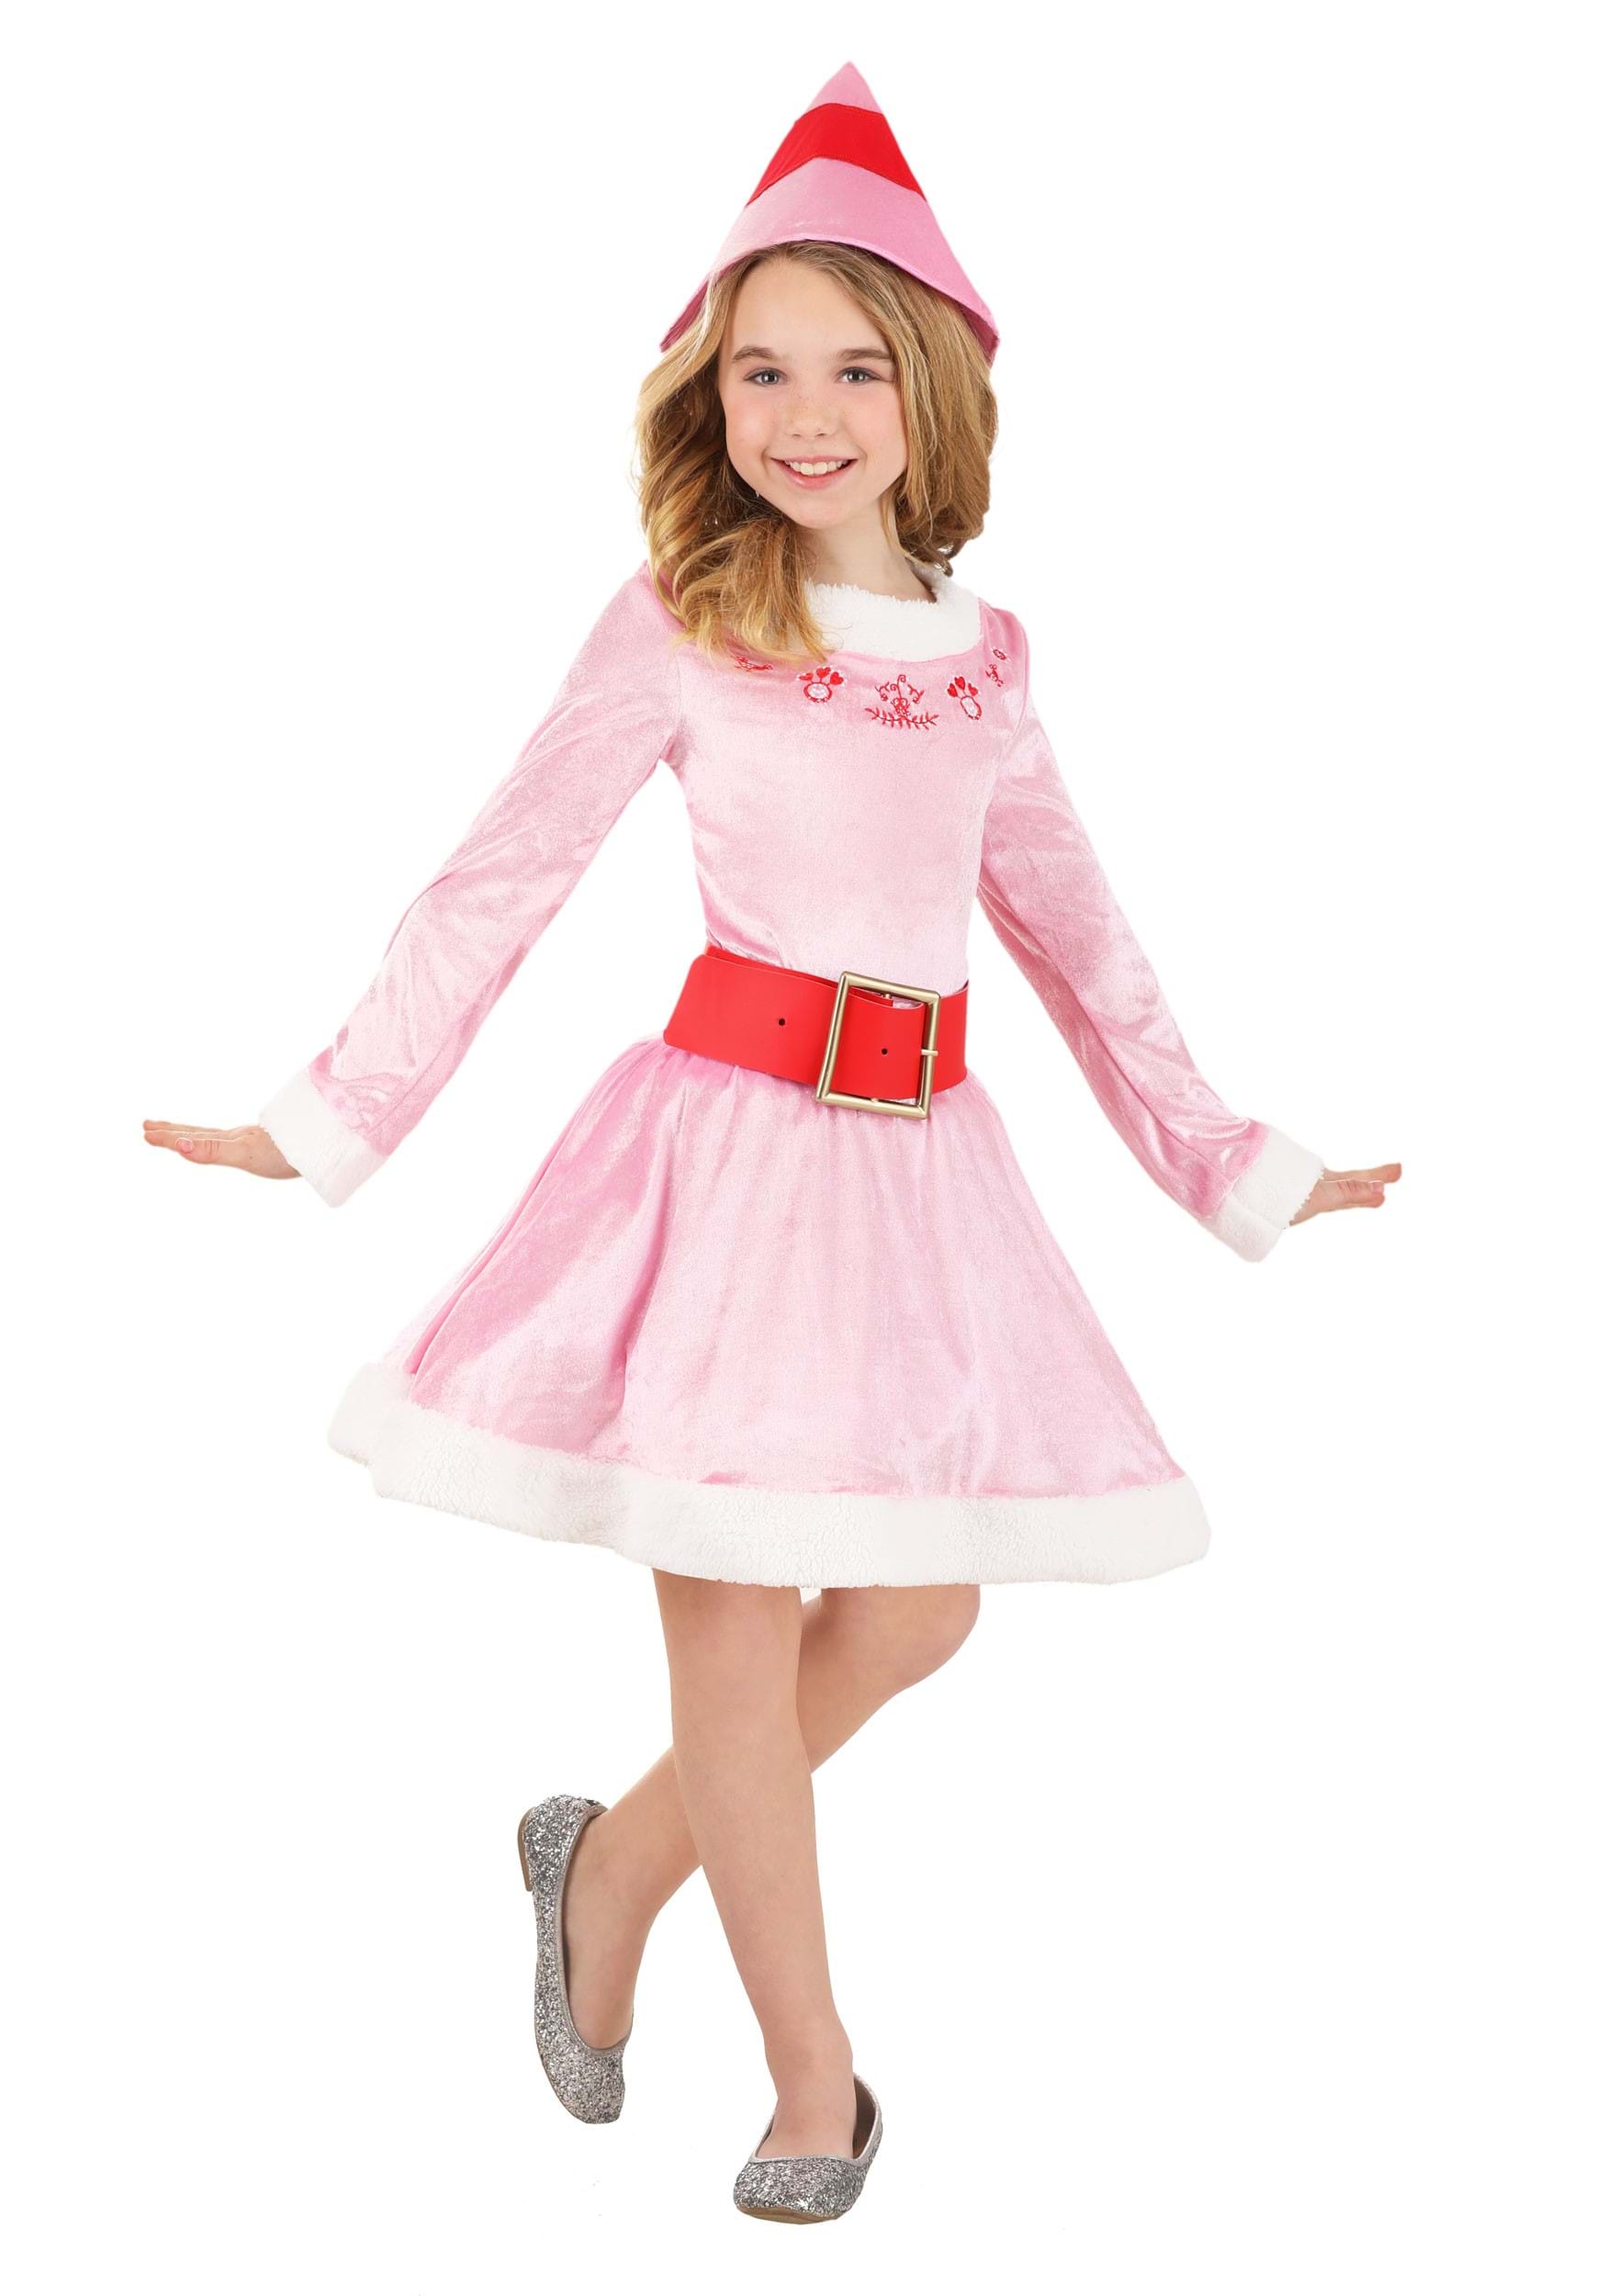 Photos - Fancy Dress ELF Jerry Leigh  Jovie Costume for Girls | Holiday Costumes Pink/Red 